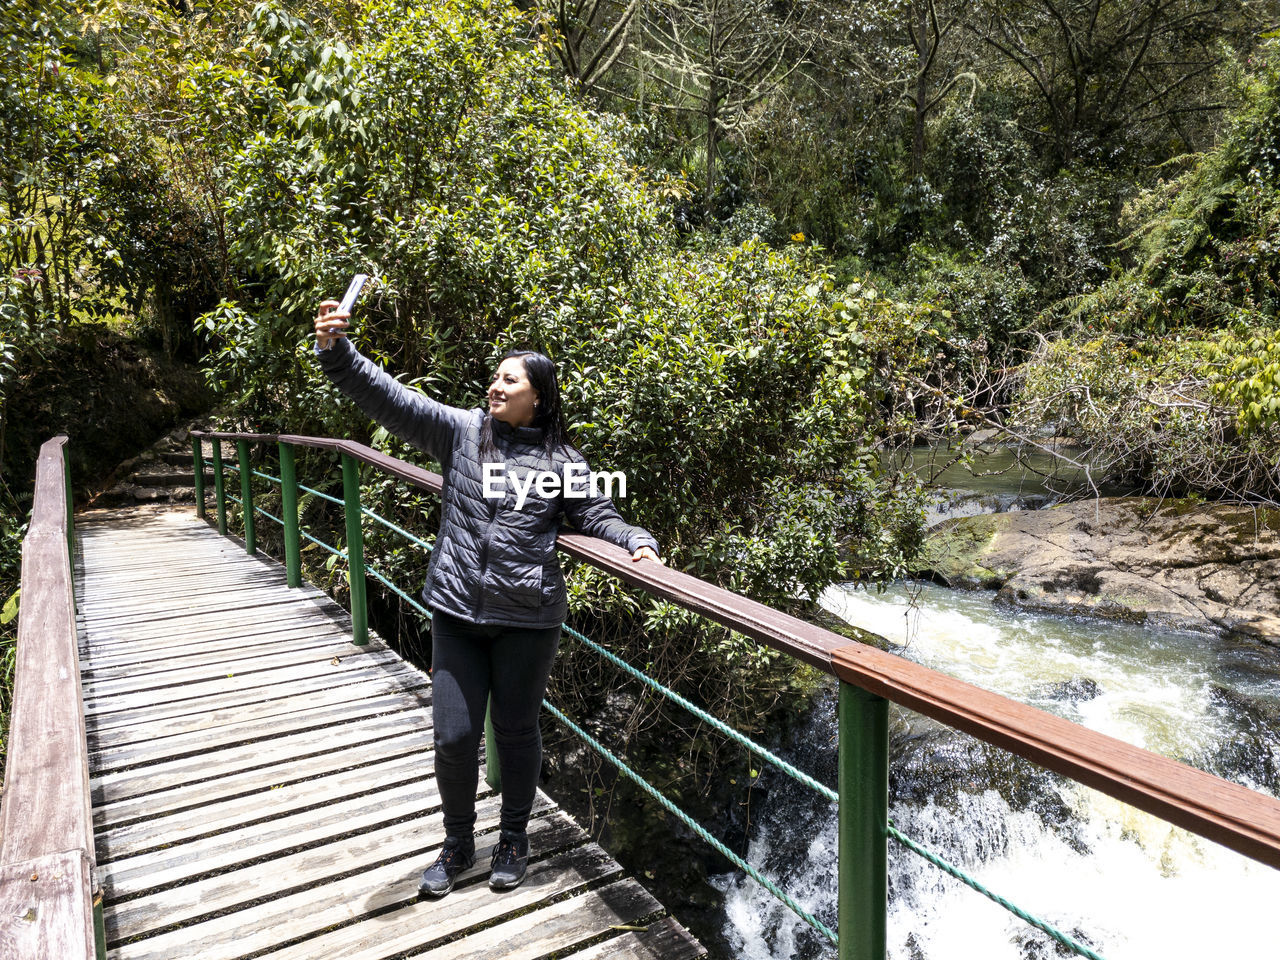 one person, full length, railing, plant, nature, tree, leisure activity, adult, standing, lifestyles, bridge, day, casual clothing, footbridge, young adult, arm, women, limb, water, outdoors, architecture, beauty in nature, wood, forest, growth, footpath, front view, sunlight, person, built structure, green, arms raised, rope bridge, female, the way forward, clothing, walkway, happiness, river, emotion, tranquility, travel, arms outstretched